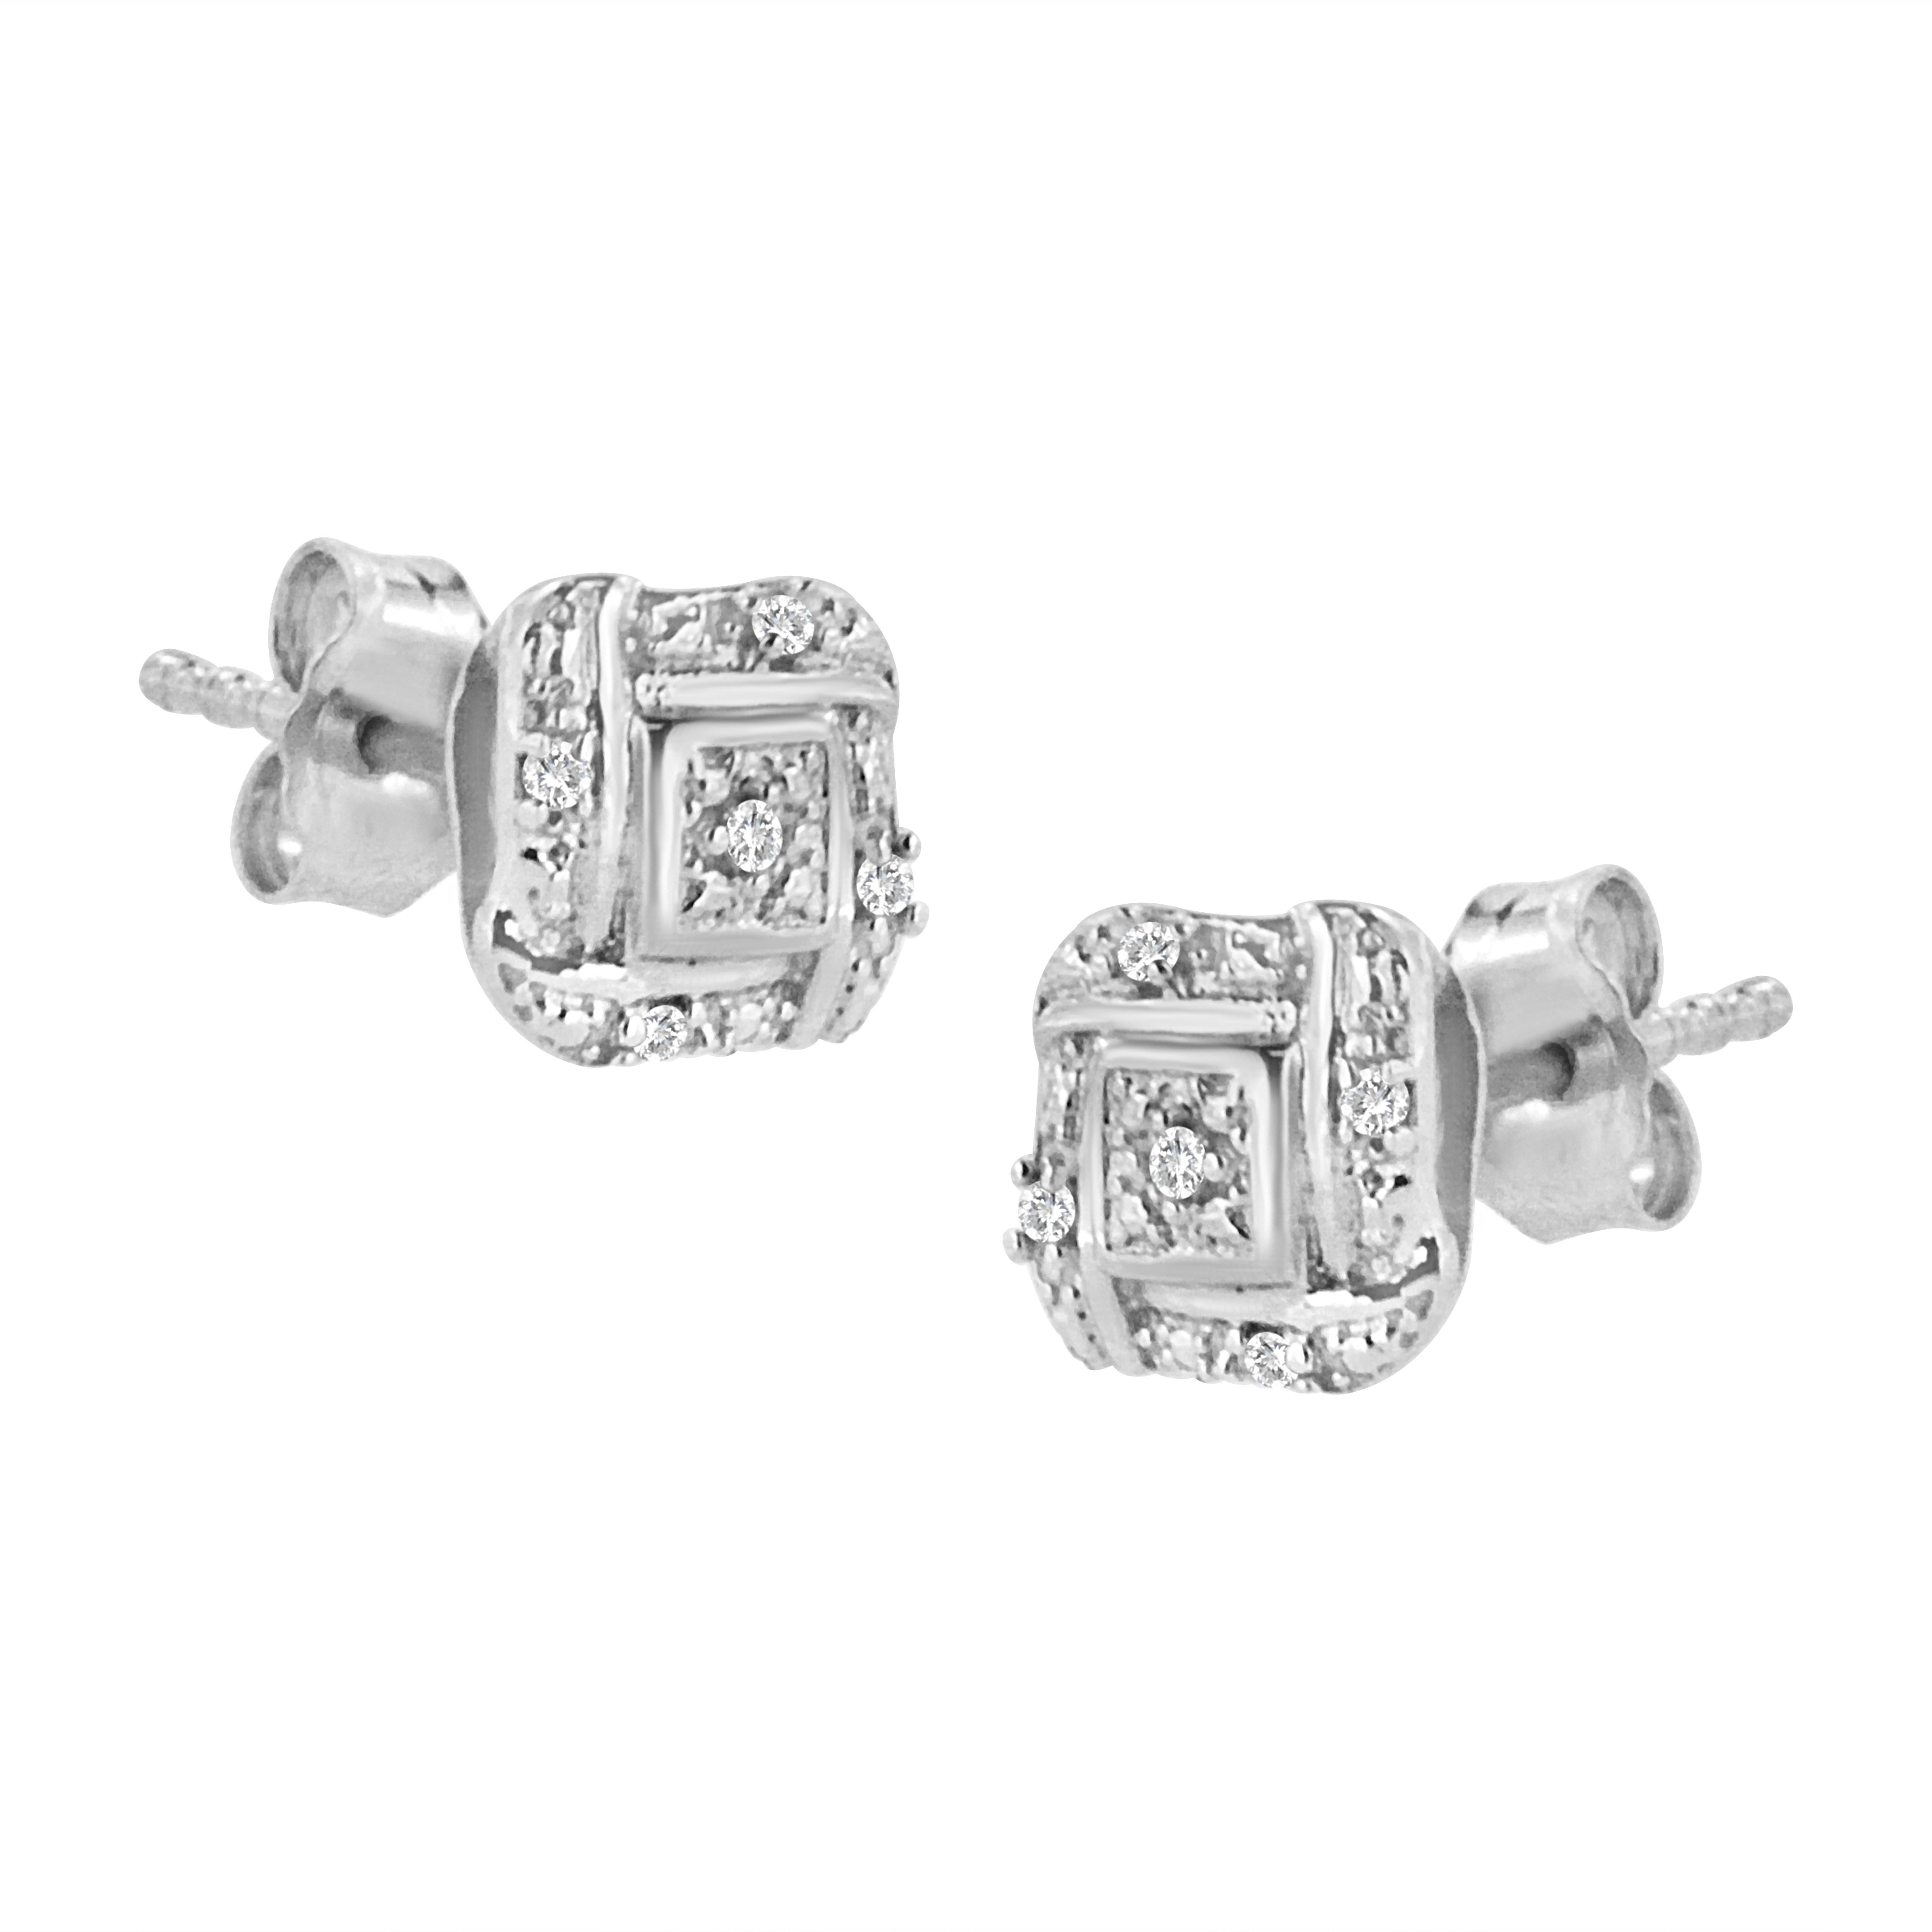 Simple yet classic, these beautiful diamond accent studs are crafted in genuine .925 sterling silver, plated with rhodium (a platinum-family metal) for a lifetime of tarnish-free wear. These earrings are created with a sterling swirl square knot